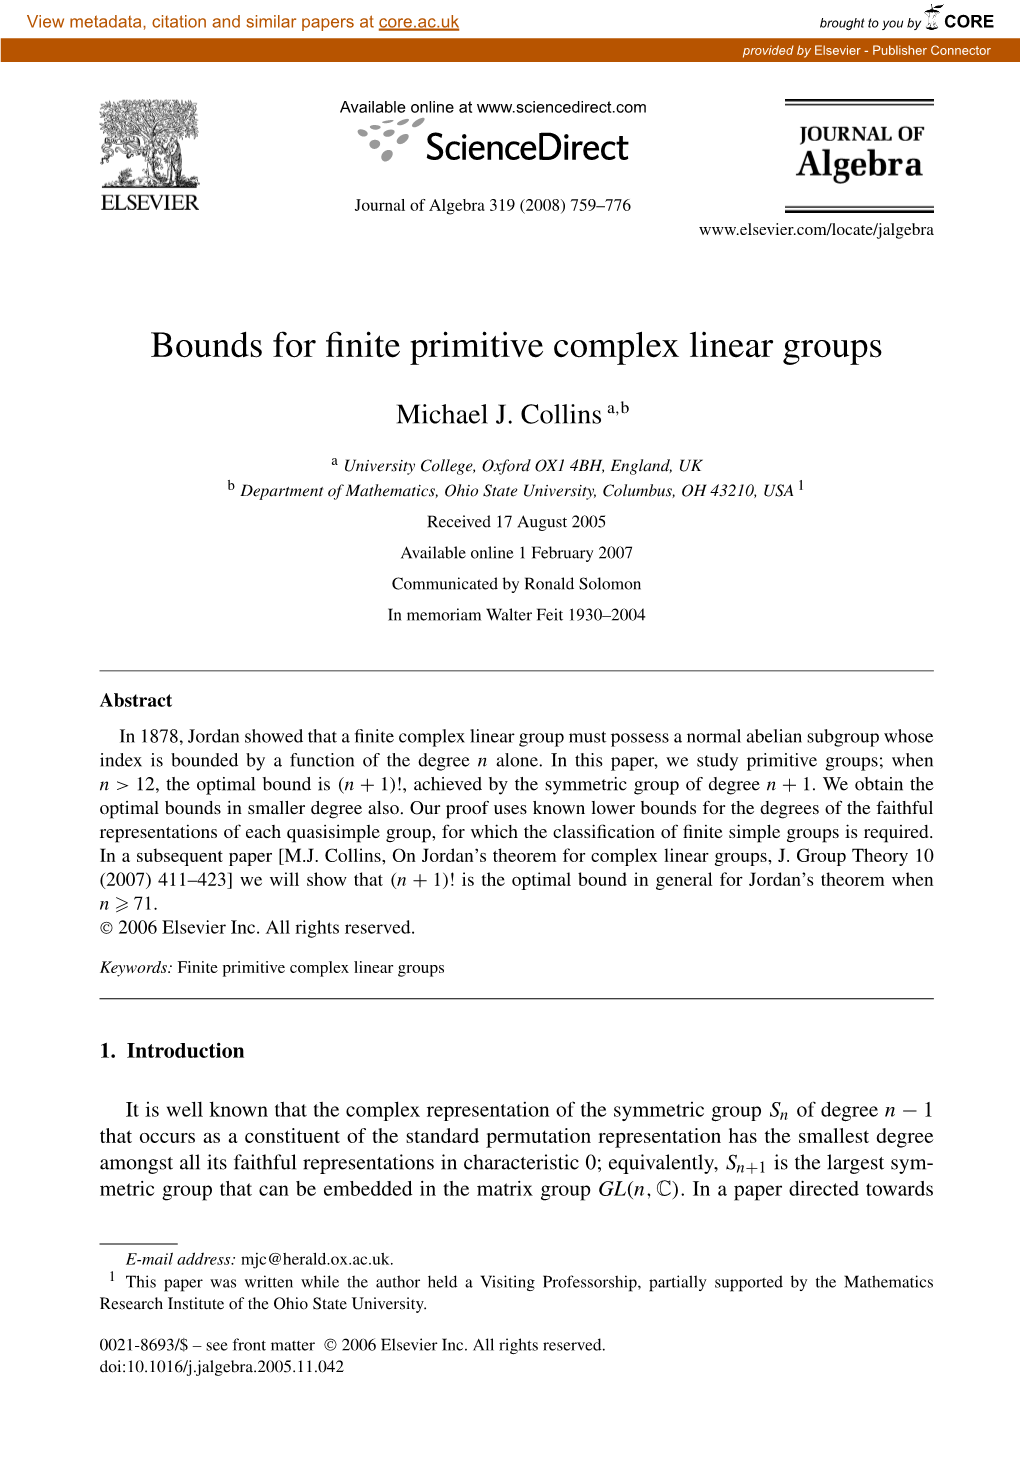 Bounds for Finite Primitive Complex Linear Groups